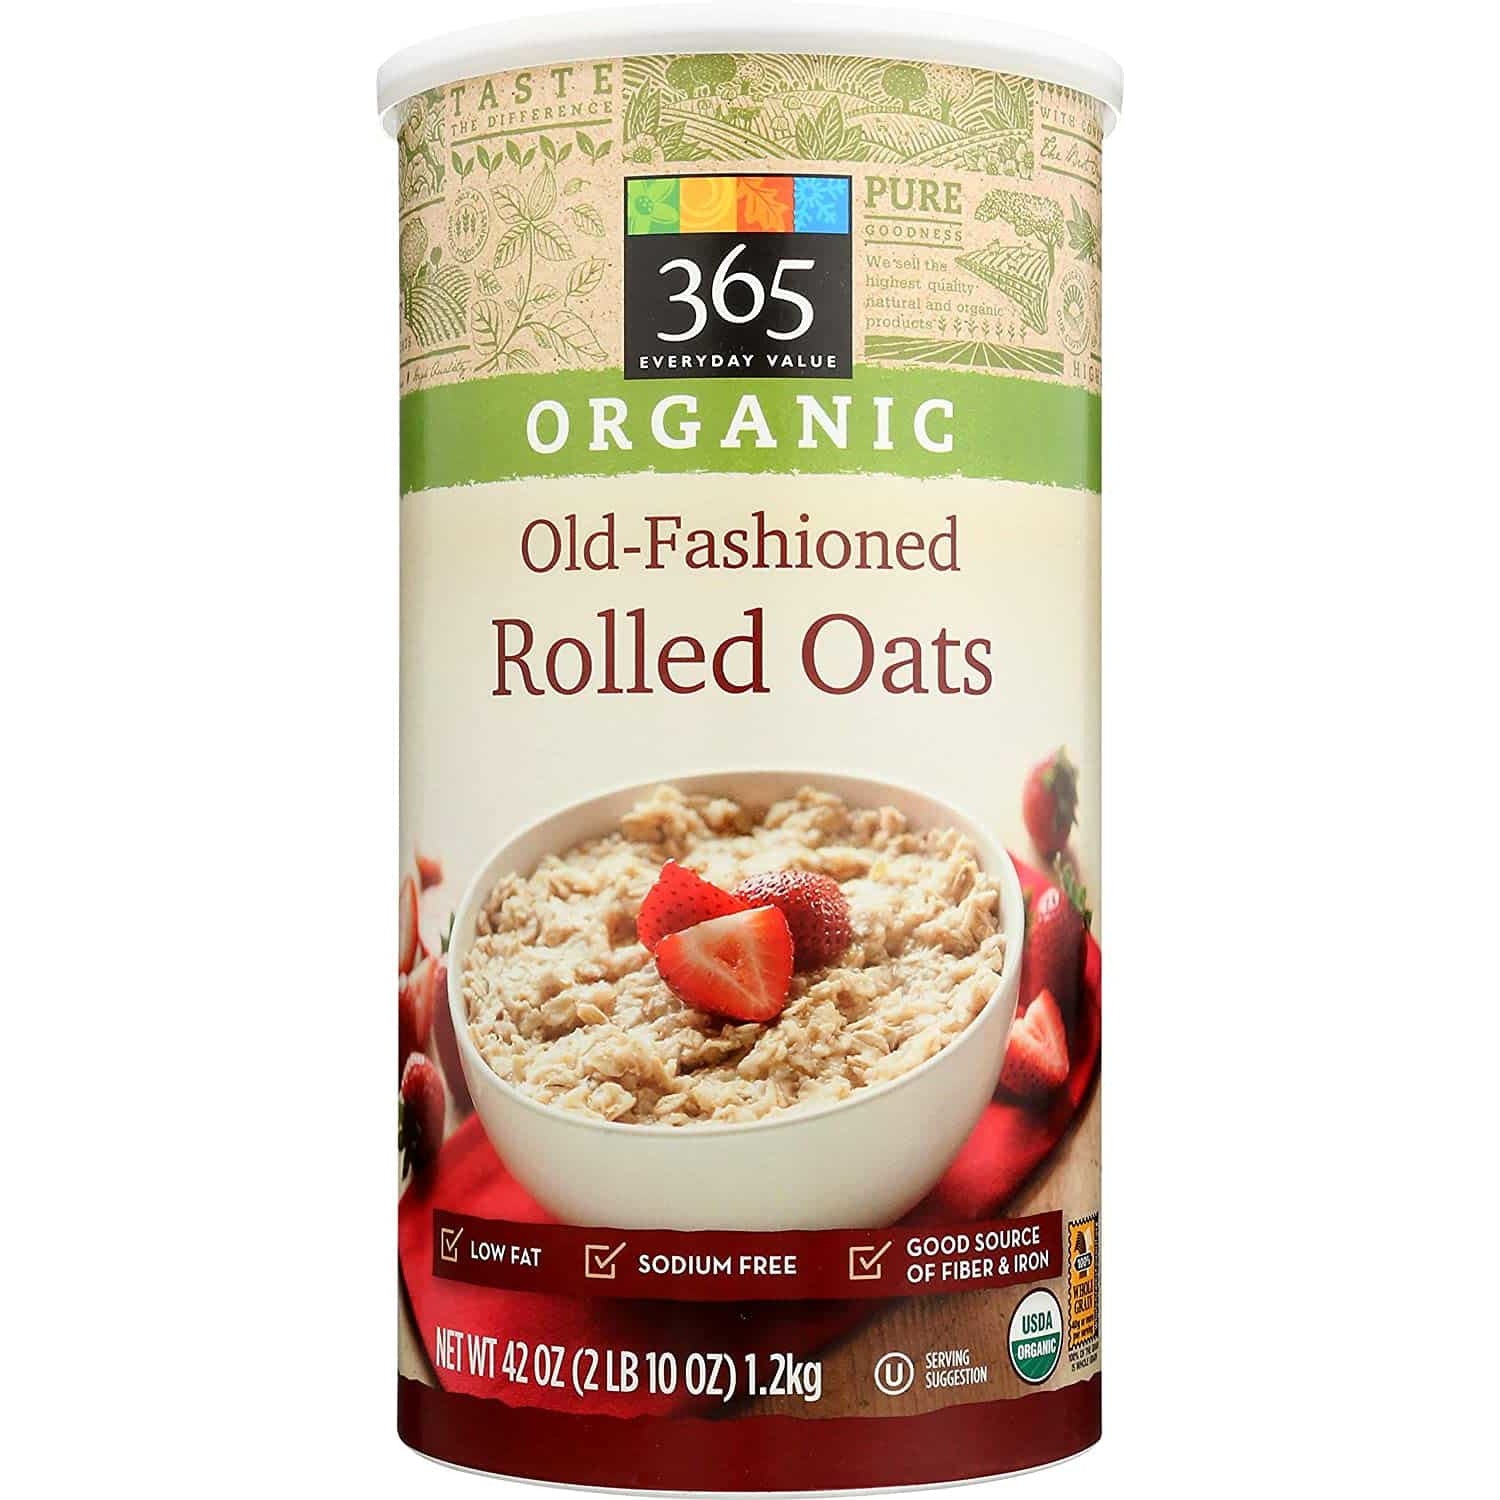 Organic Old-Fashioned Rolled Oats, 42 oz